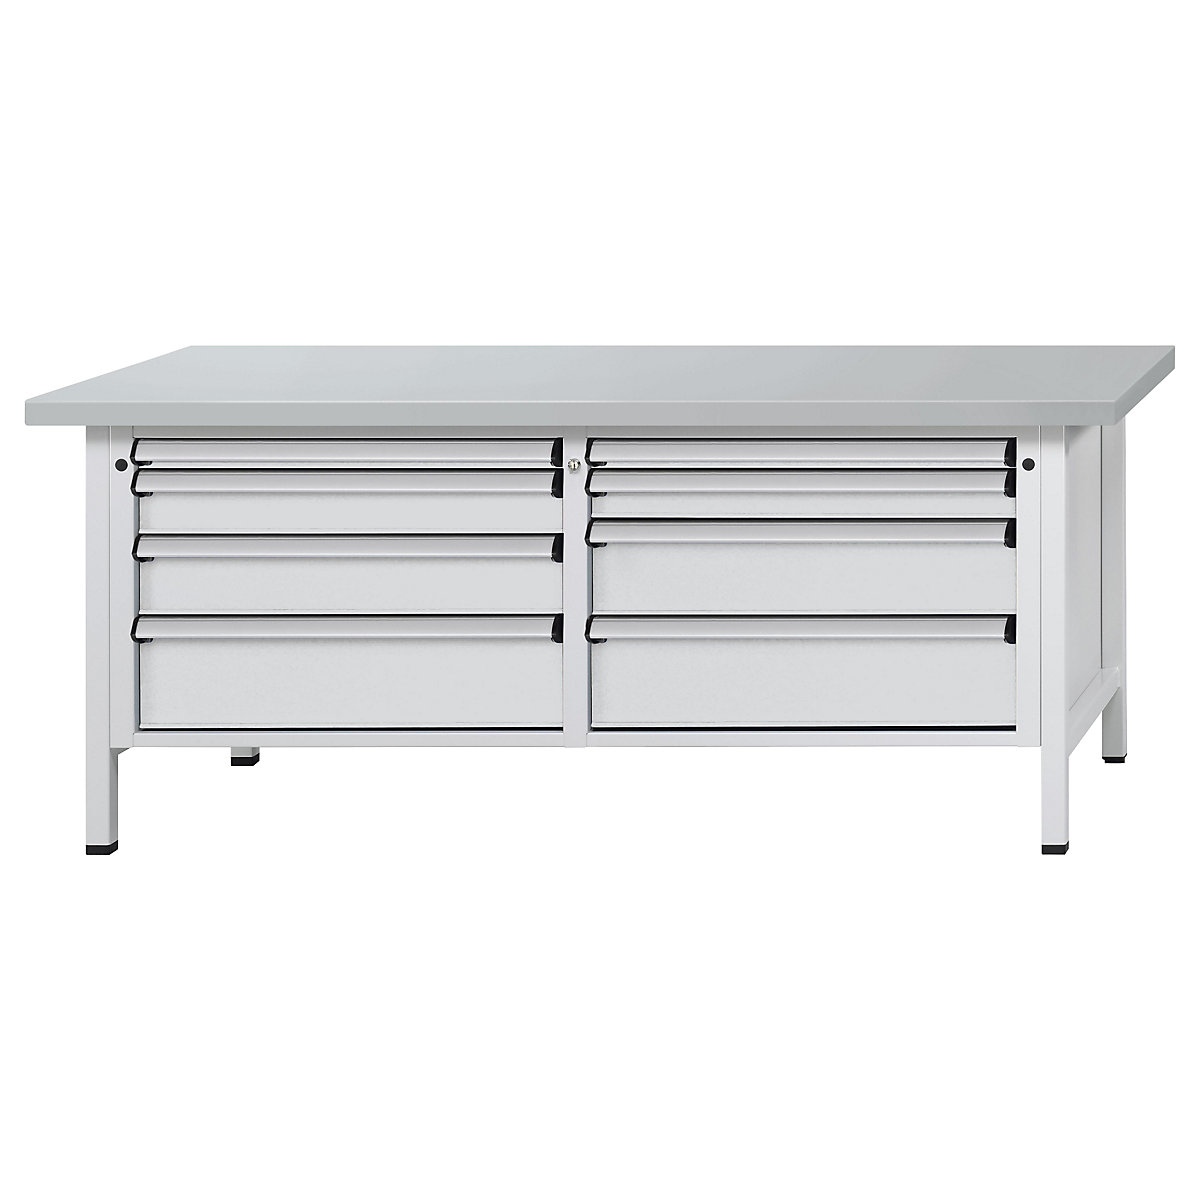 Workbench with XL/XXL drawers, frame construction – ANKE, width 2000 mm, 8 drawers, sheet steel covered worktop, front in light grey-11